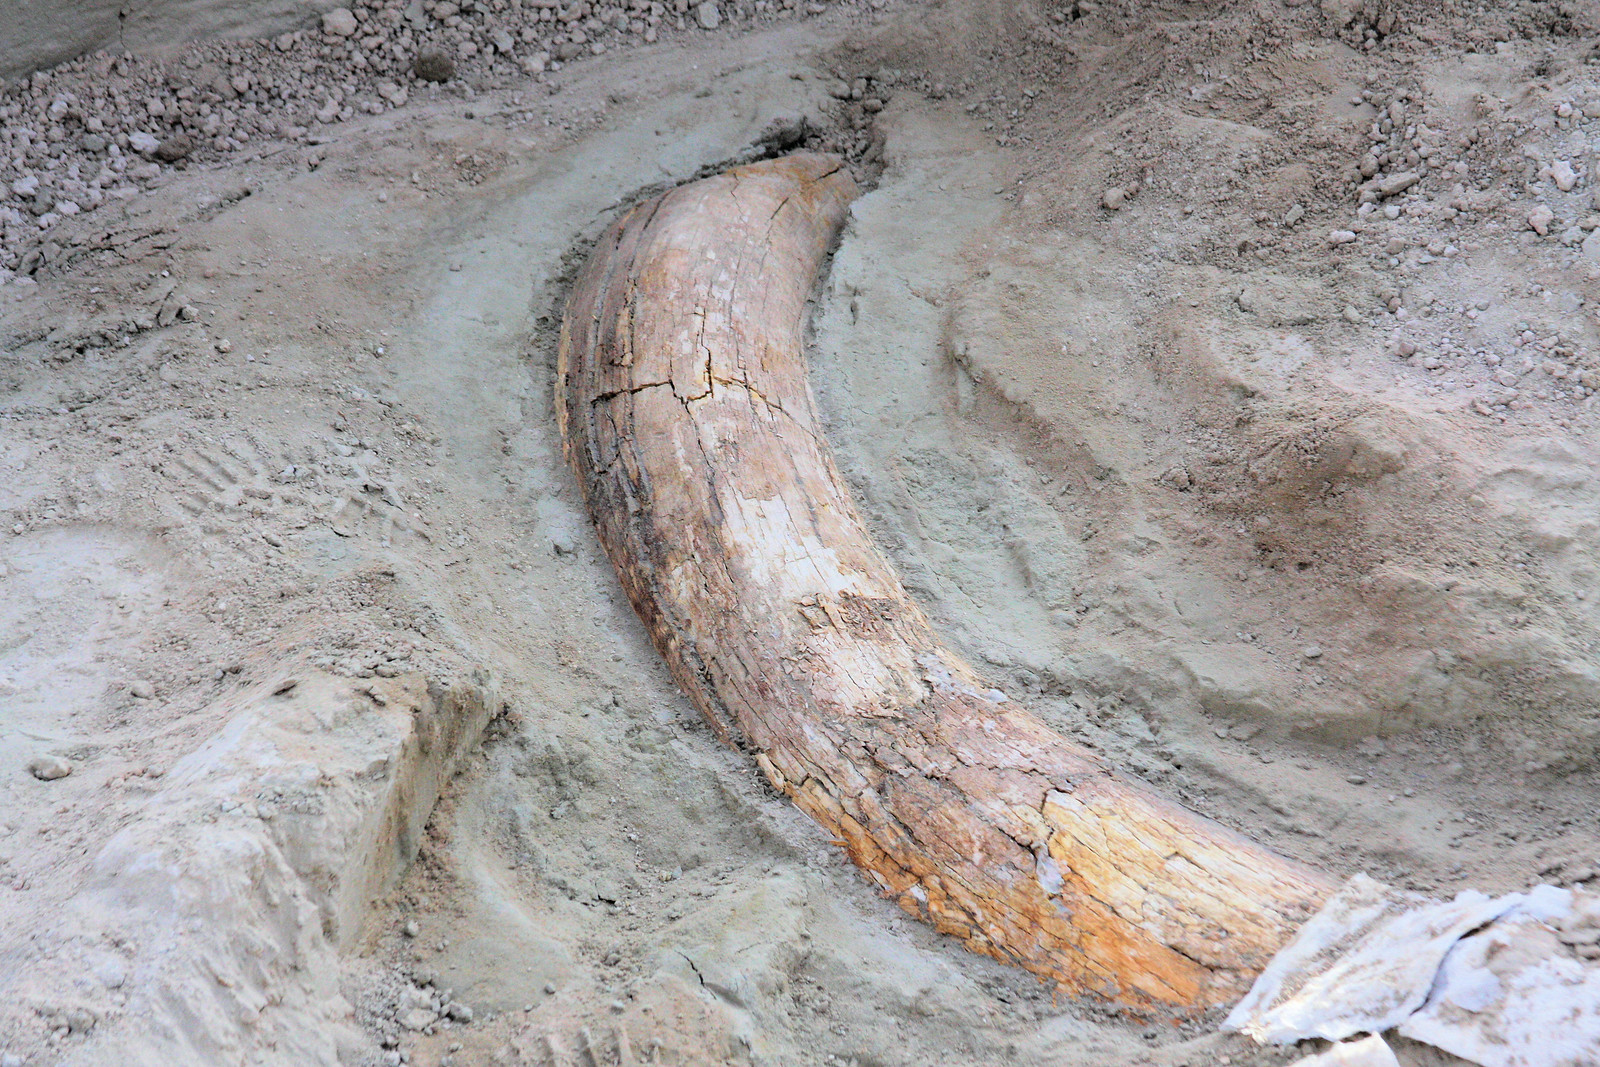 Photograph of a partially mammoth tusk still in the place where it was found, partially exposed and partially embedded in sediment.